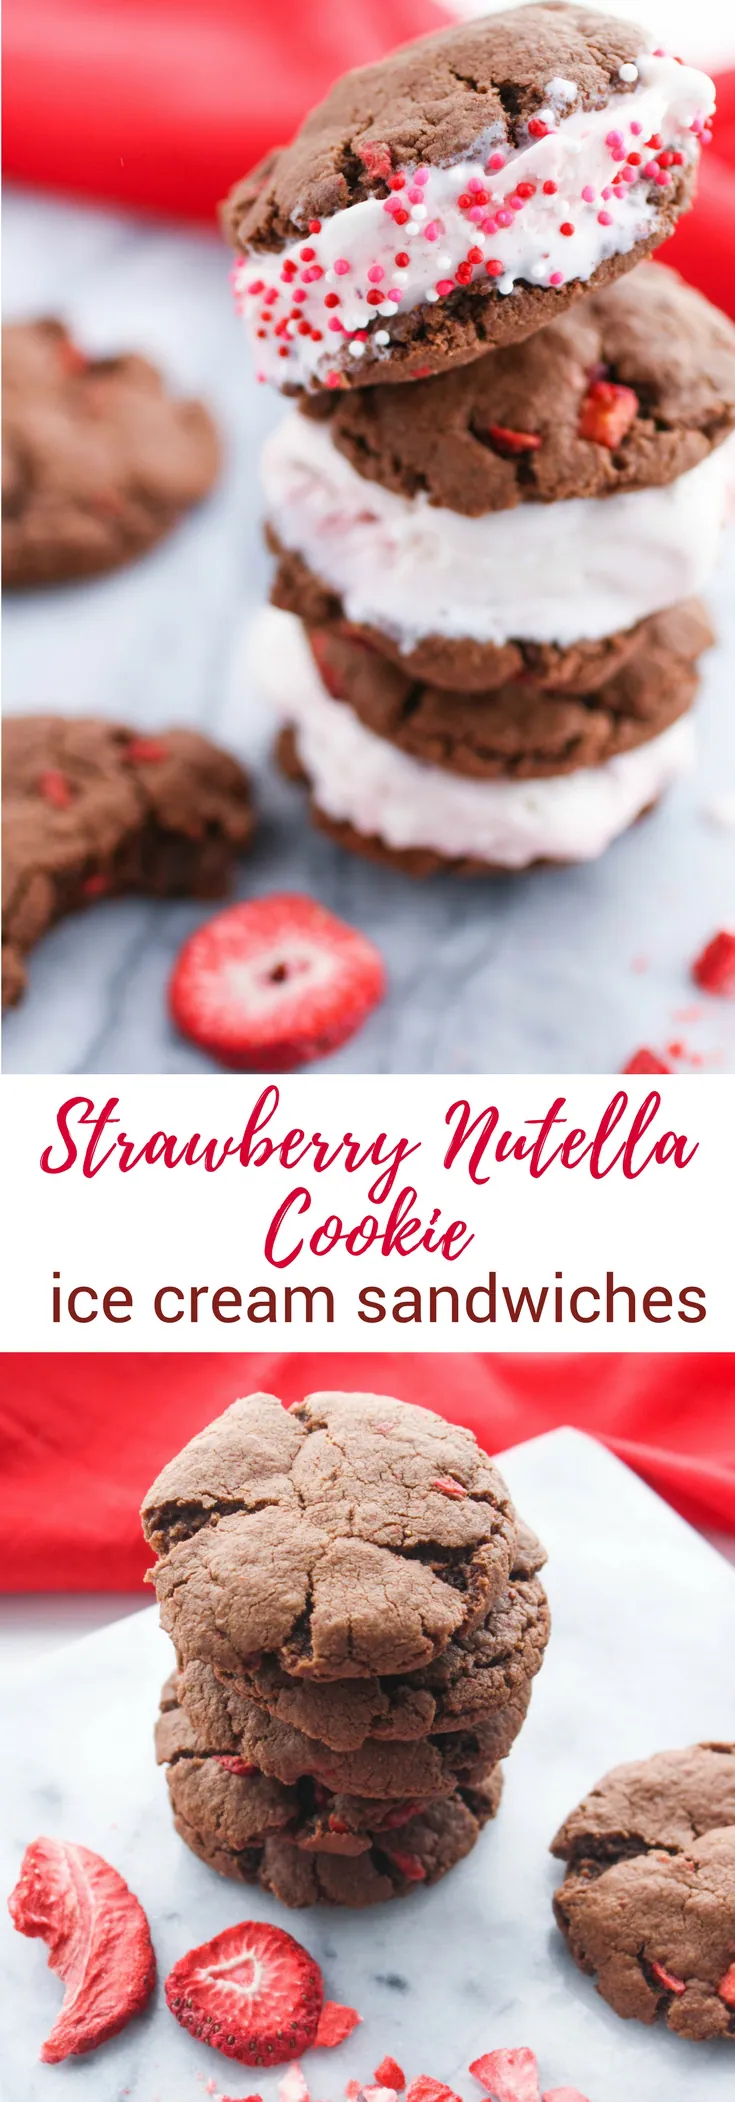 Strawberry-Nutella Cookie Ice Cream Sandwiches are a fun dessert any time of year. You'll love these Strawberry-Nutella Cookie Ice Cream Sandwiches!